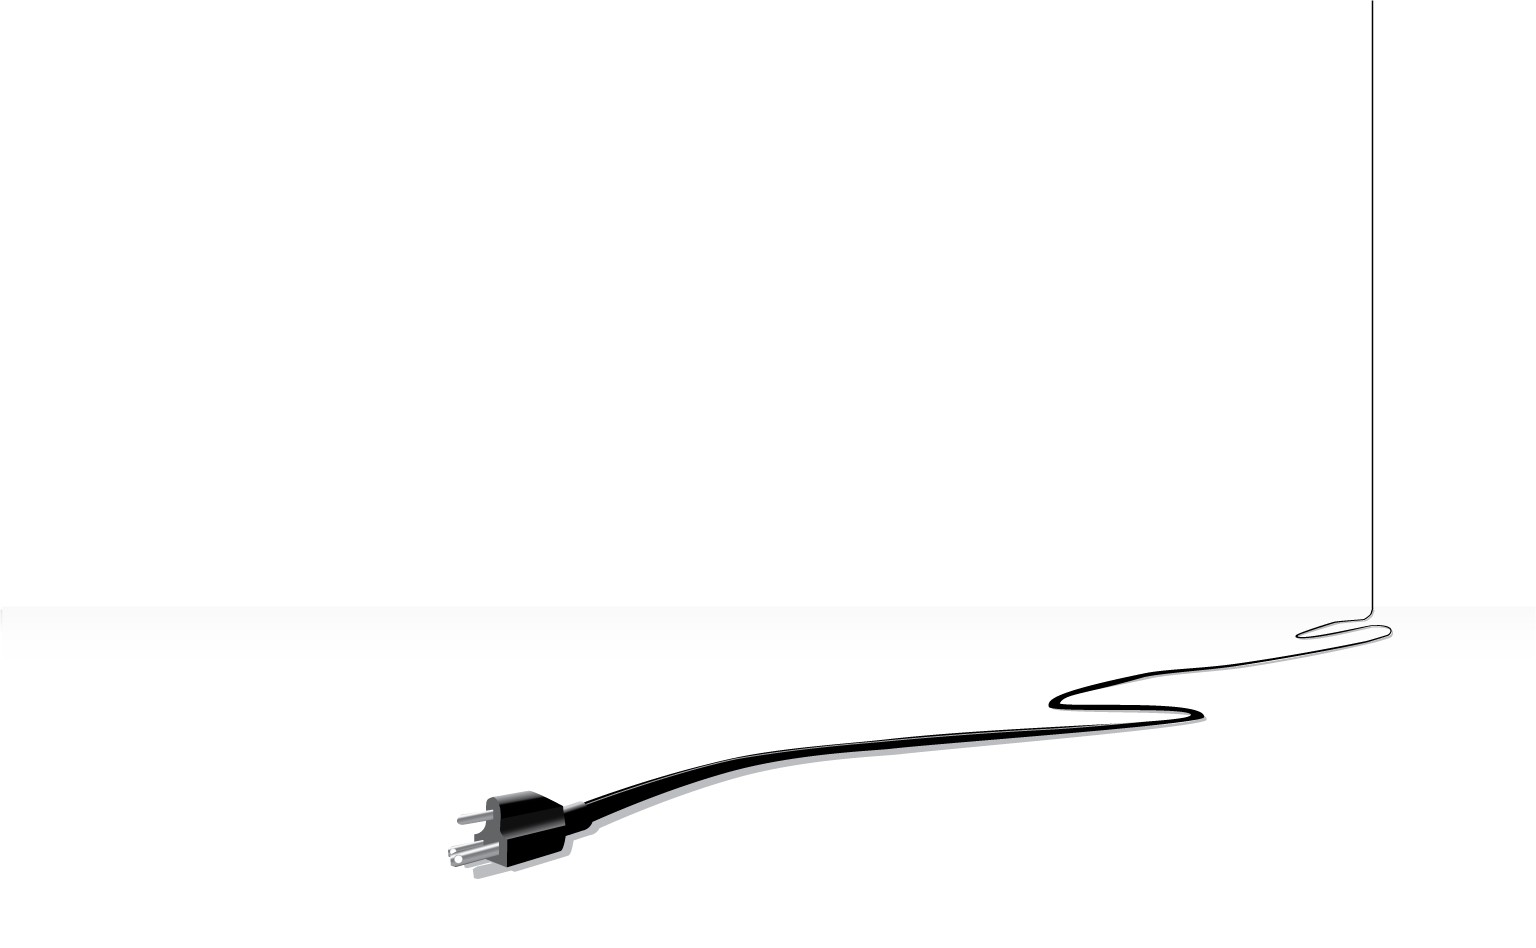 Electricity Power Cord Simple Background Minimalism Digital Art White Background Wallpaper:1536x948